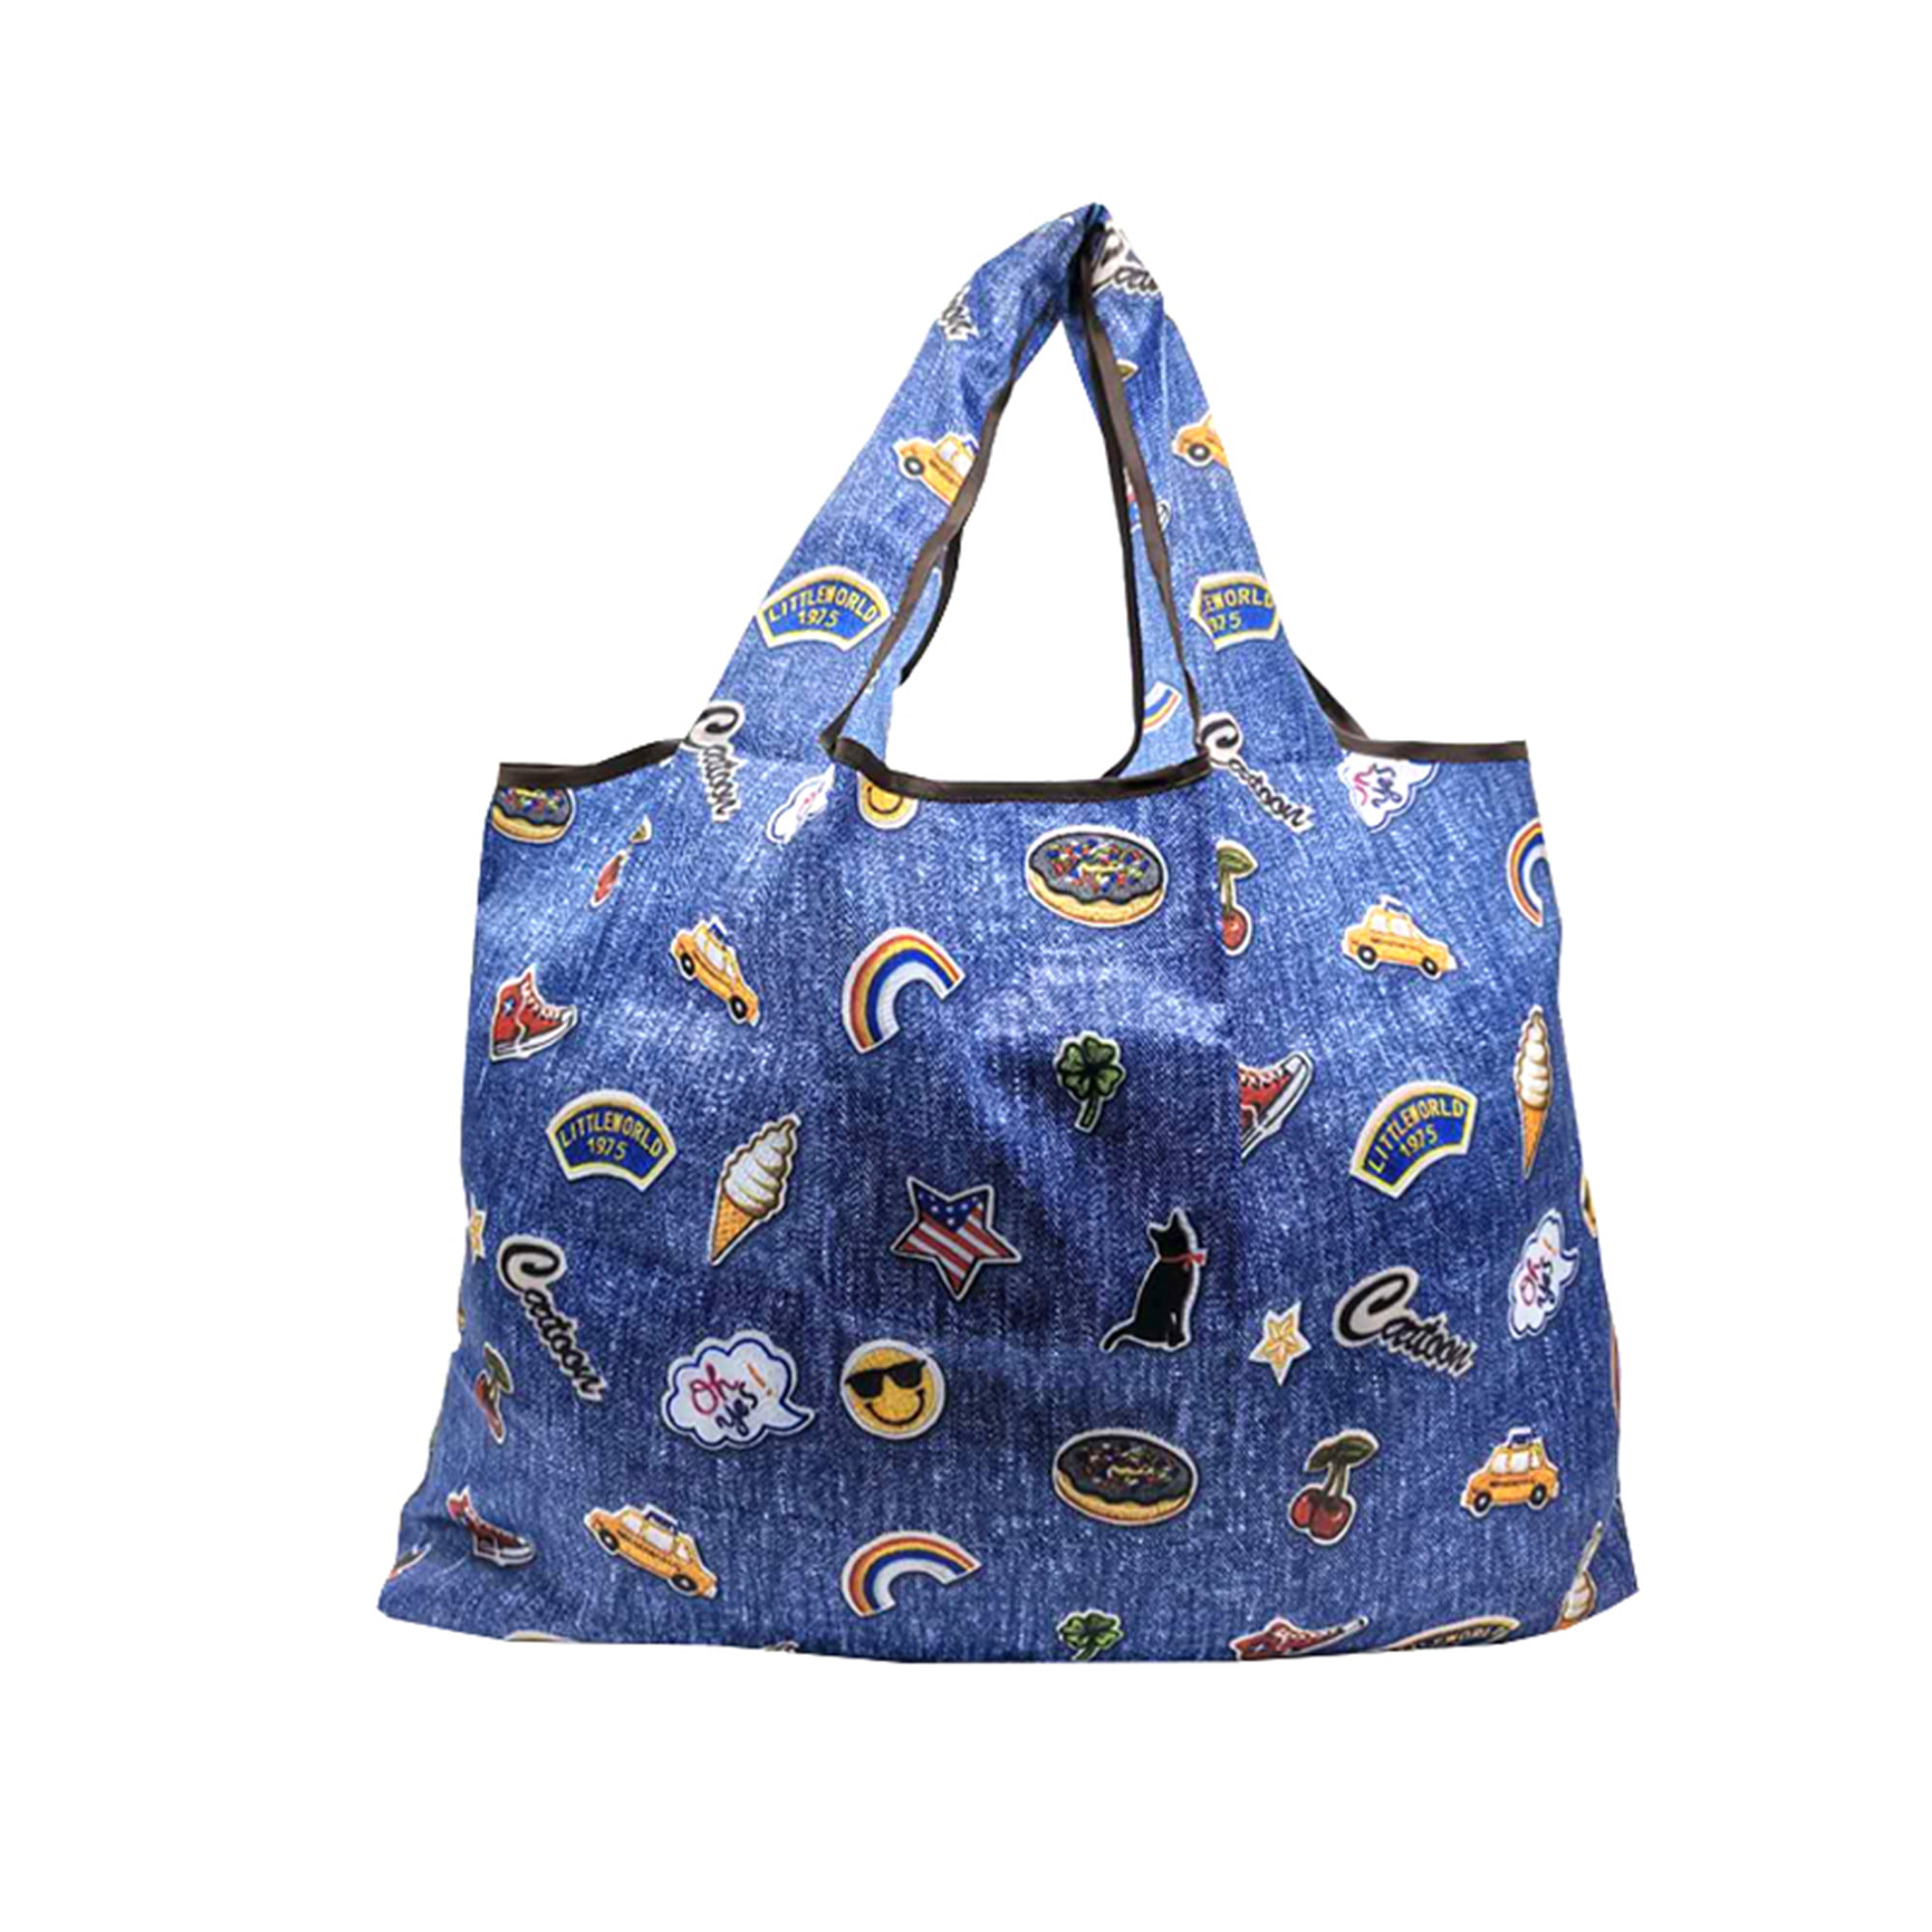 Kitty Cats Kitten Themed Reusable Eco Foldaway Roll Up Shopping Bag Pouch Large 